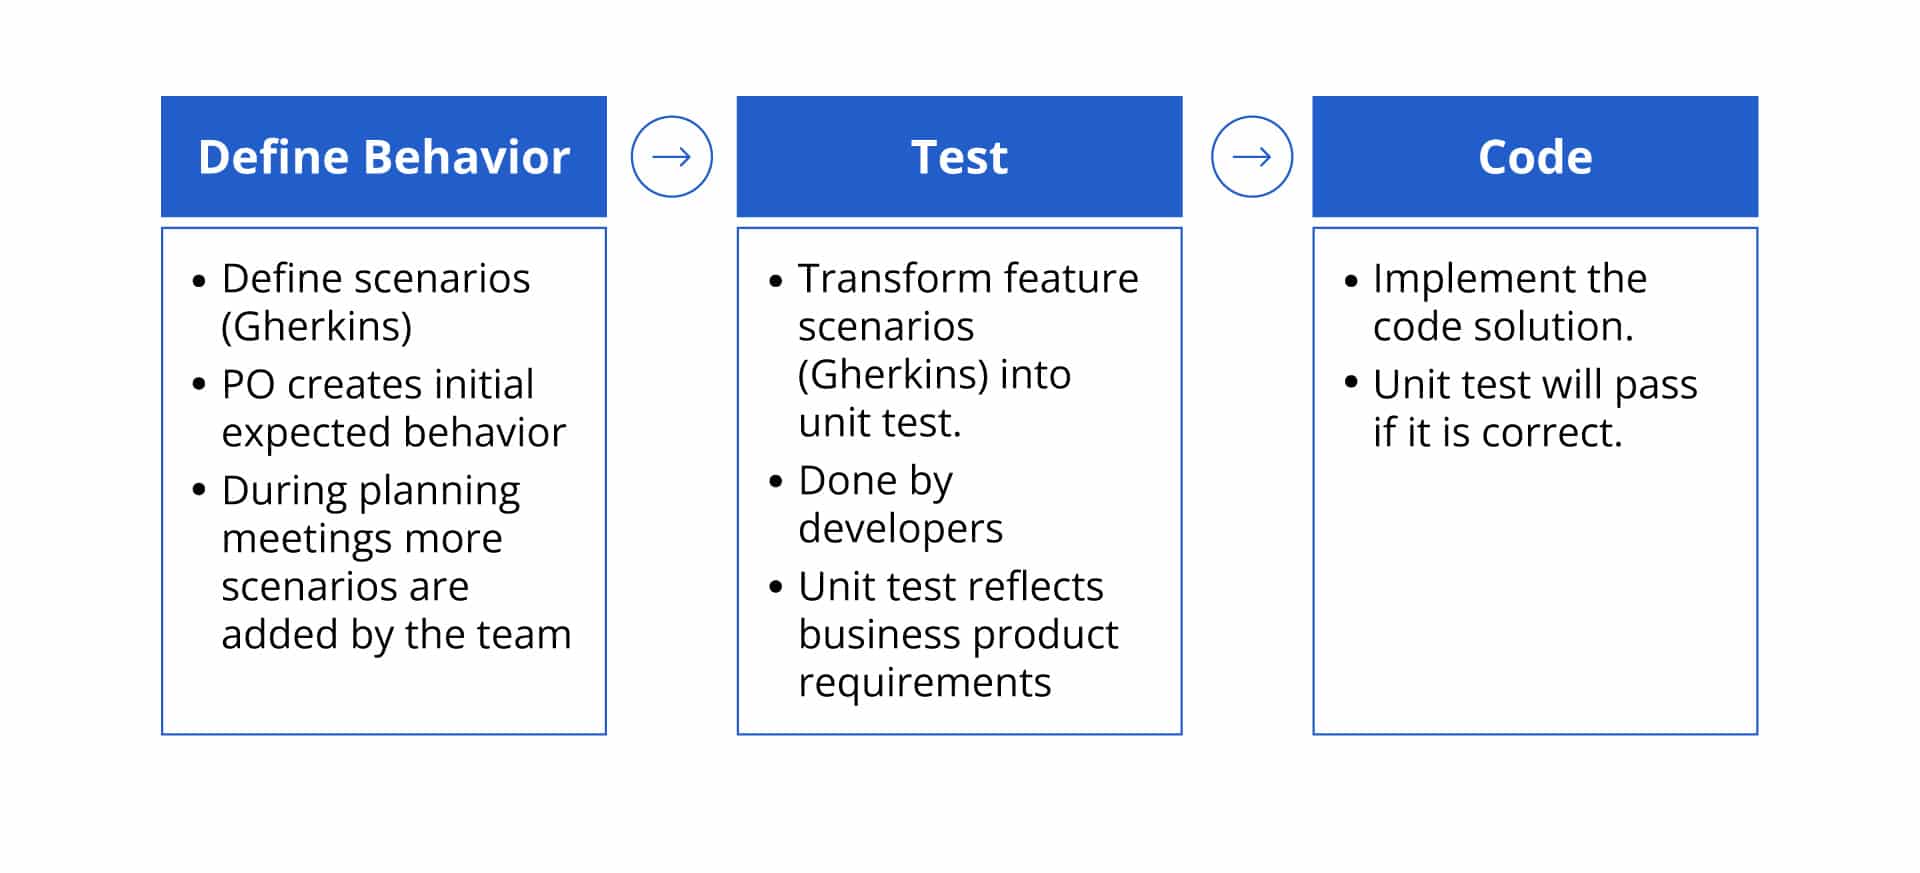 With Behavior-Driven Development it's important to understand the approach : Define Behavior, Test scenarios, and implement code solutions.